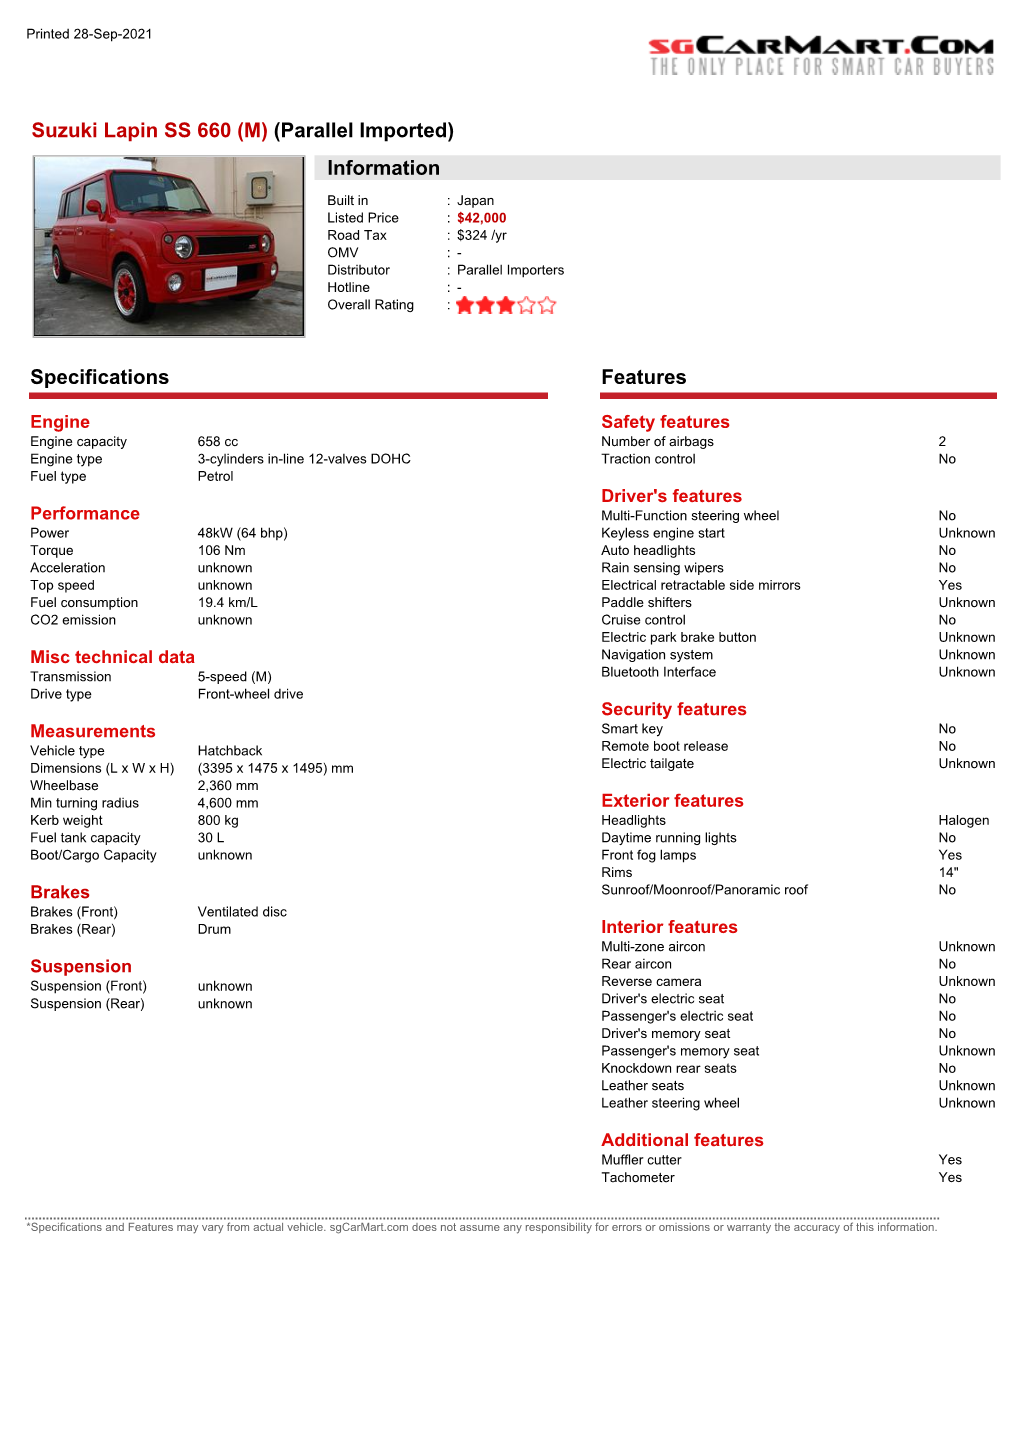 Suzuki Lapin SS 660 (A) (Parallel Imported) Information Specifications